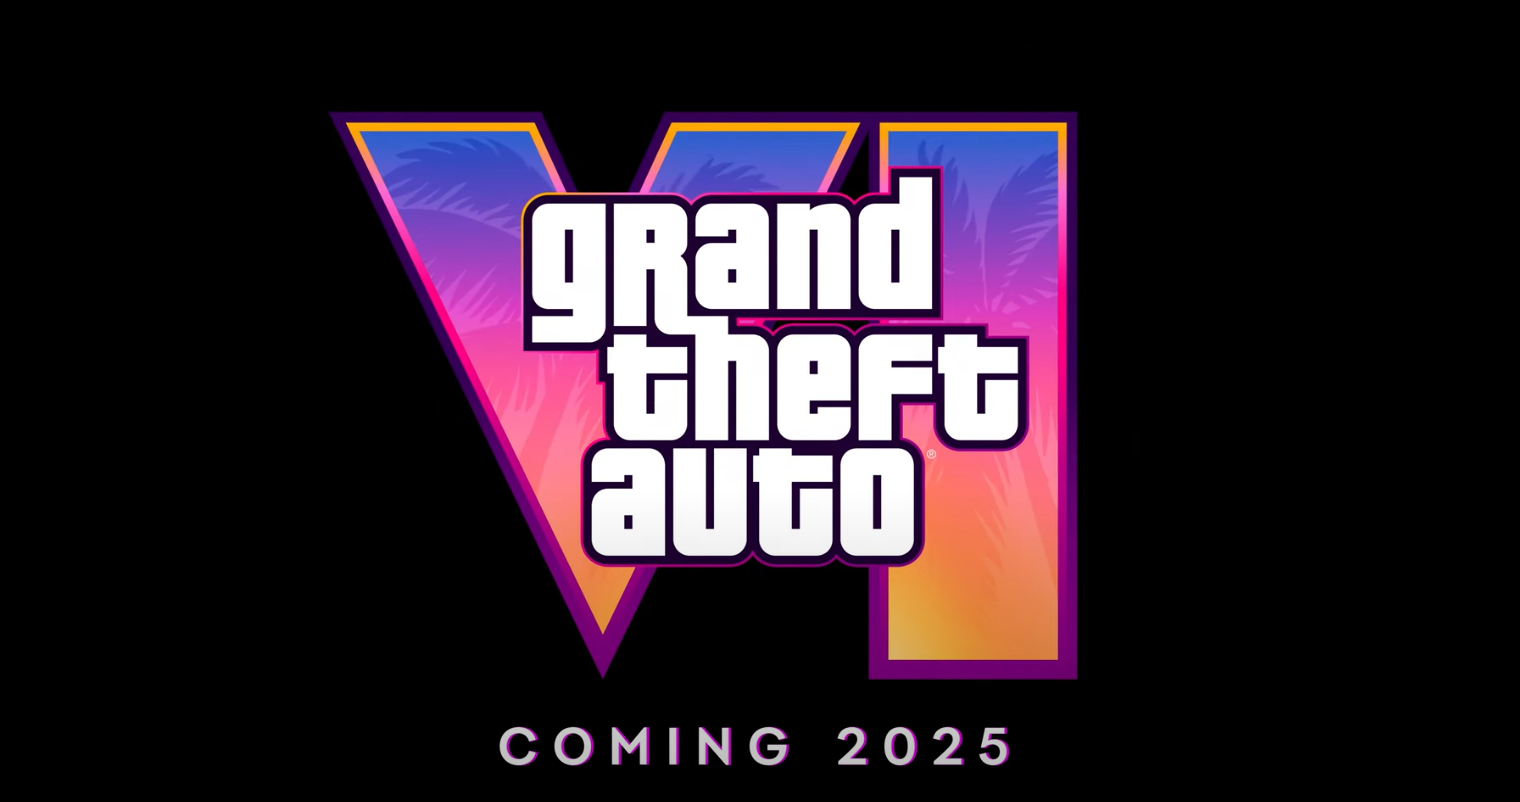 Grand Theft Auto VI Trailer Brings Players Back to Vice City